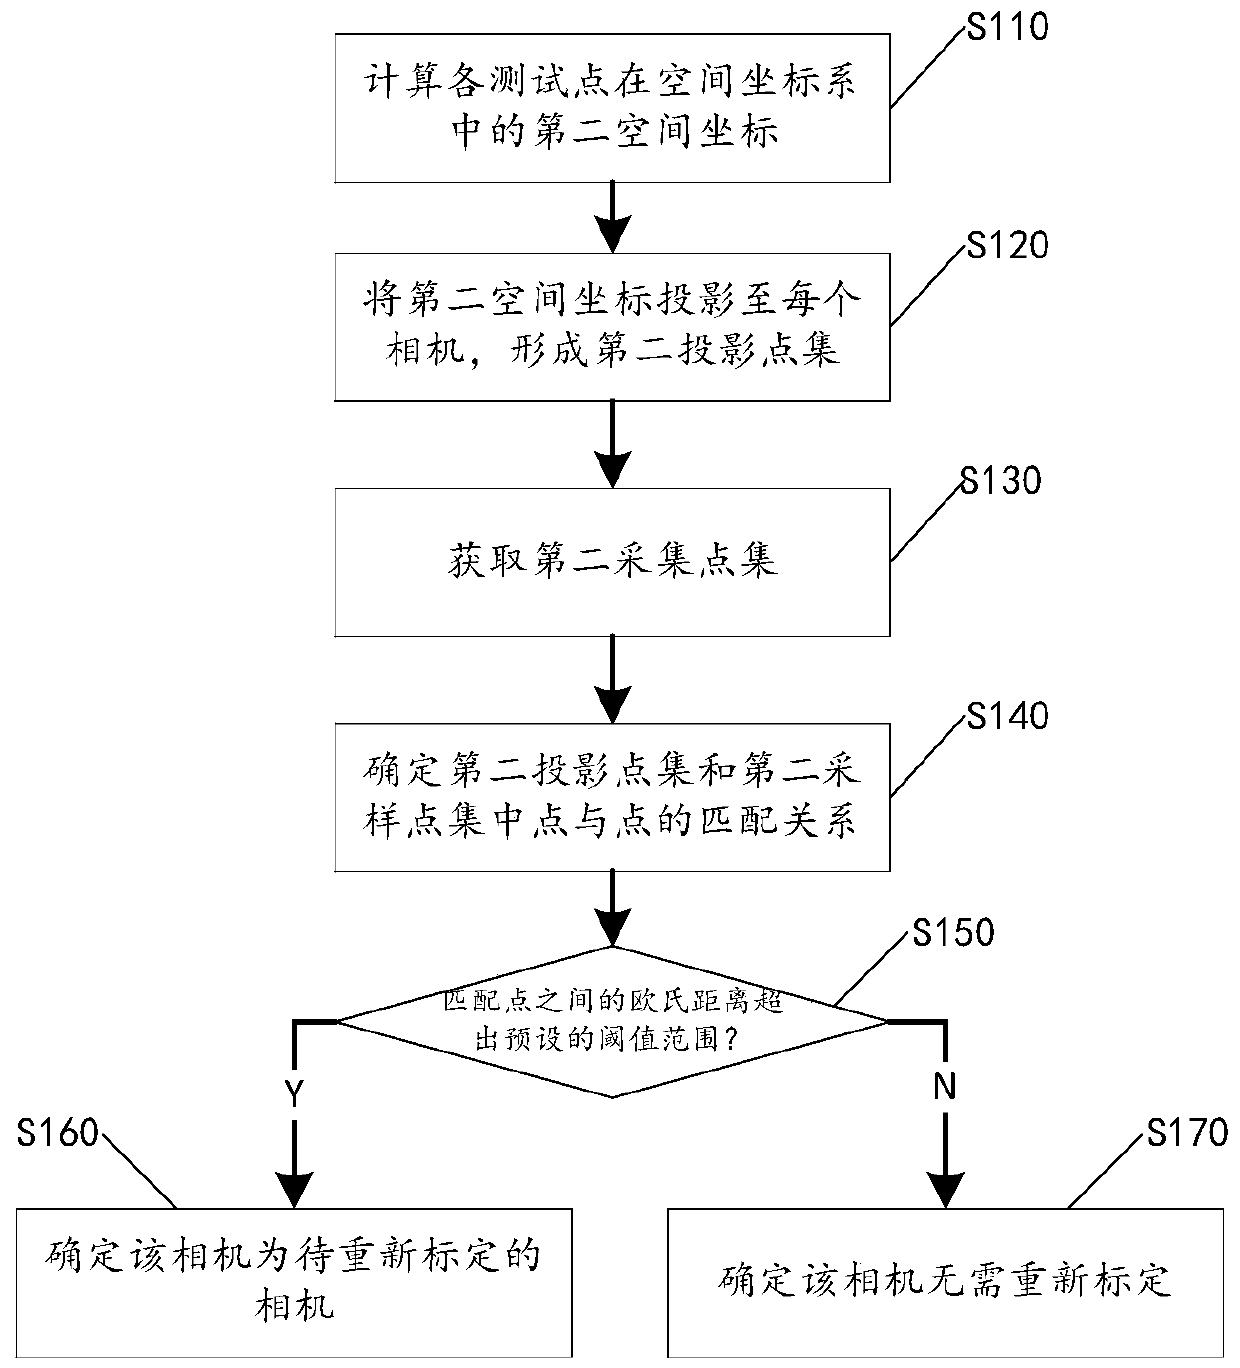 Camera automatic calibration method and optical motion capture system